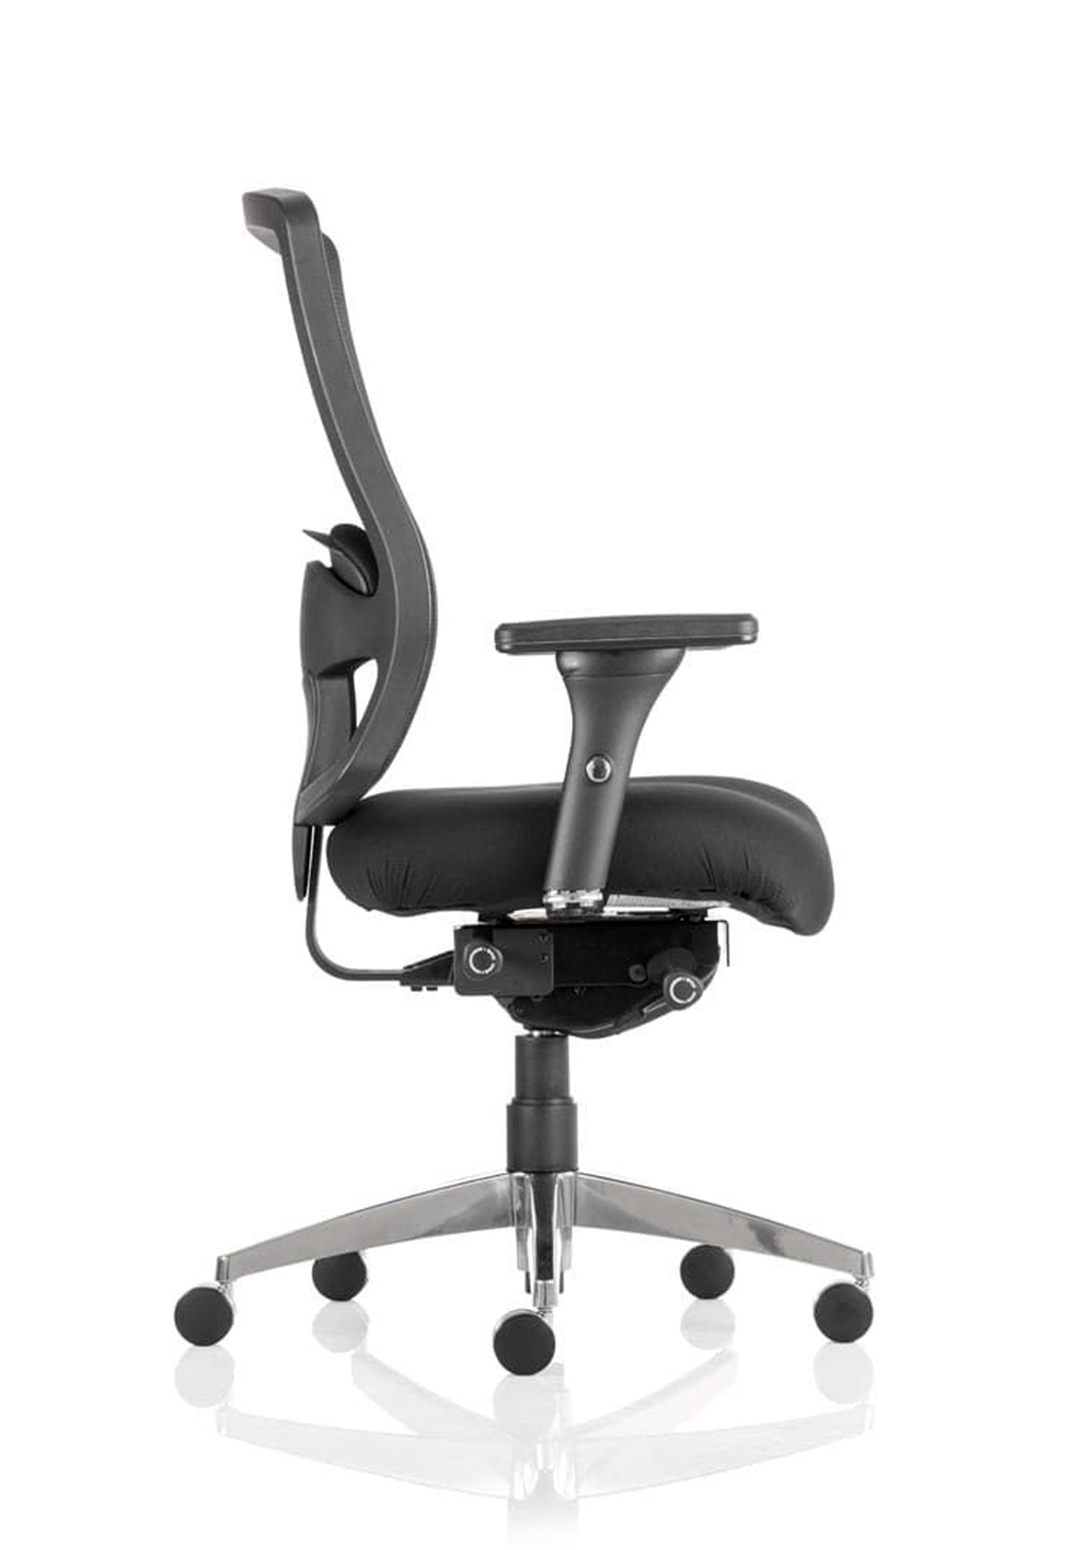 Regent Home Office Chair | Operator Chair | Home Office Furniture | Ergonomic Office Chair | Ergonomic Office Furniture